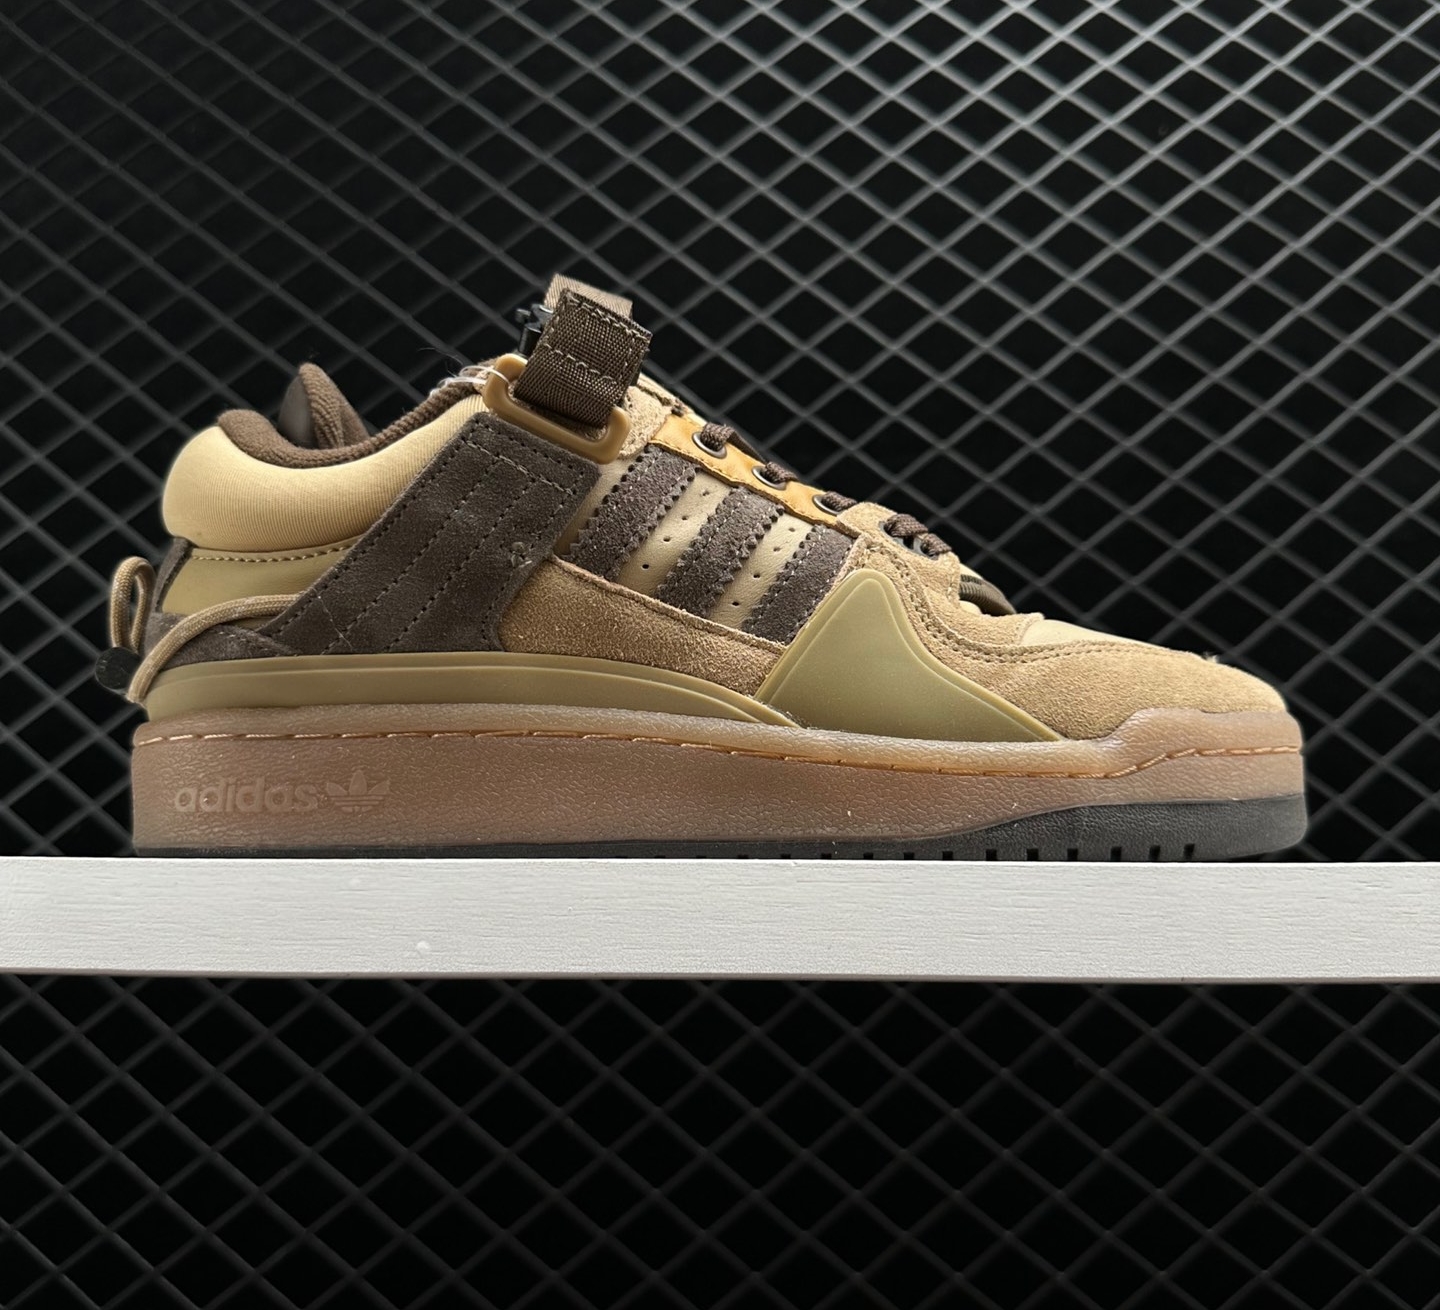 Adidas Bad Bunny x Forum Buckle Low 'The First Cafe' GW0264 - Limited Edition Collaboration